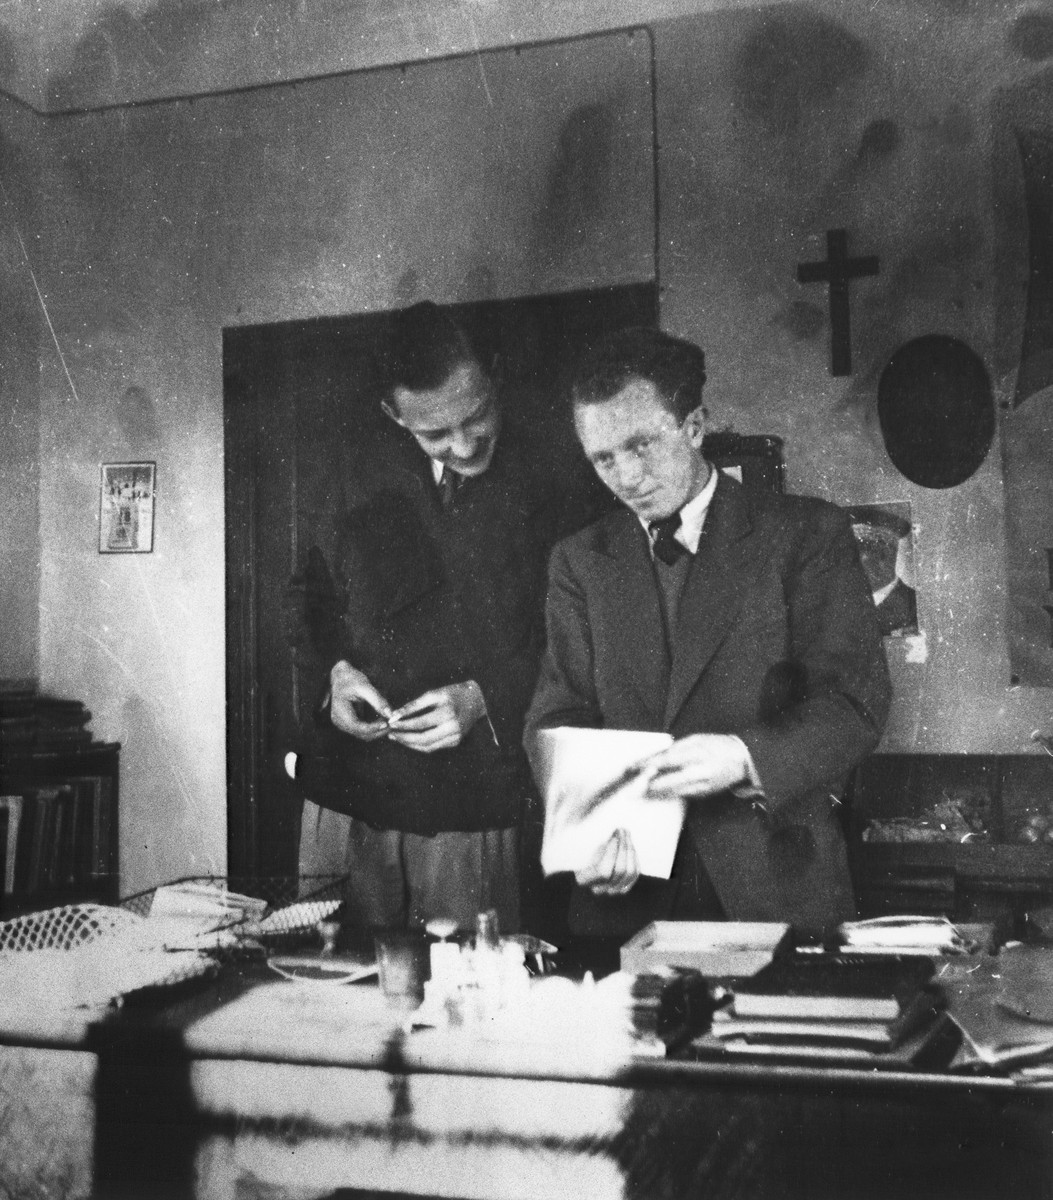 Joseph Fisera and a colleague look over some papers in his office in the Vence children's home.